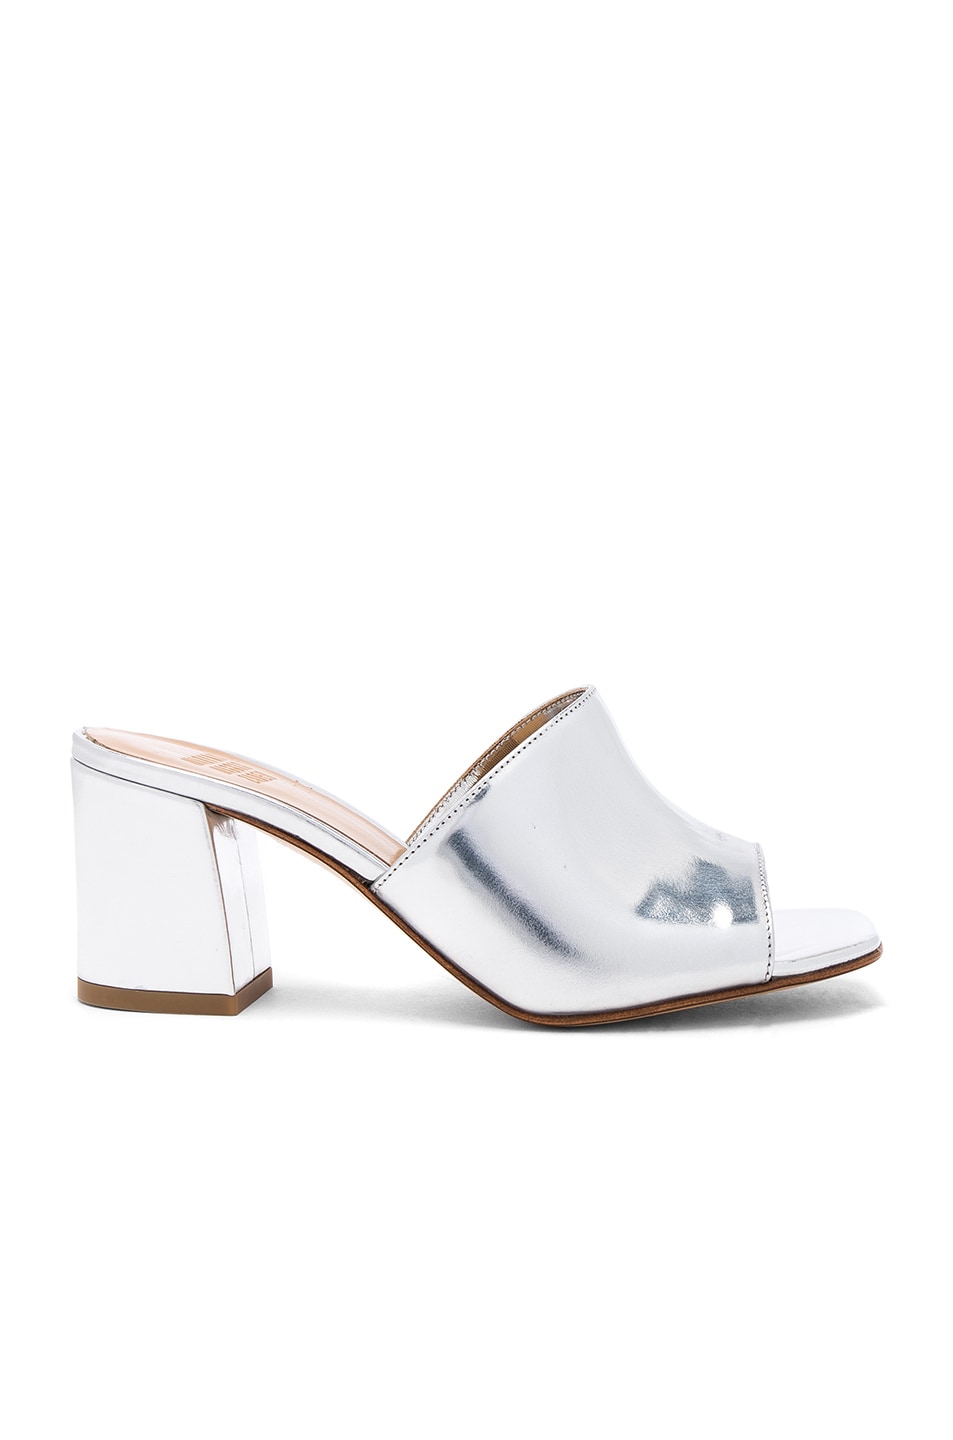 Image 1 of Maryam Nassir Zadeh Leather Mar Mules in Silver Metallic